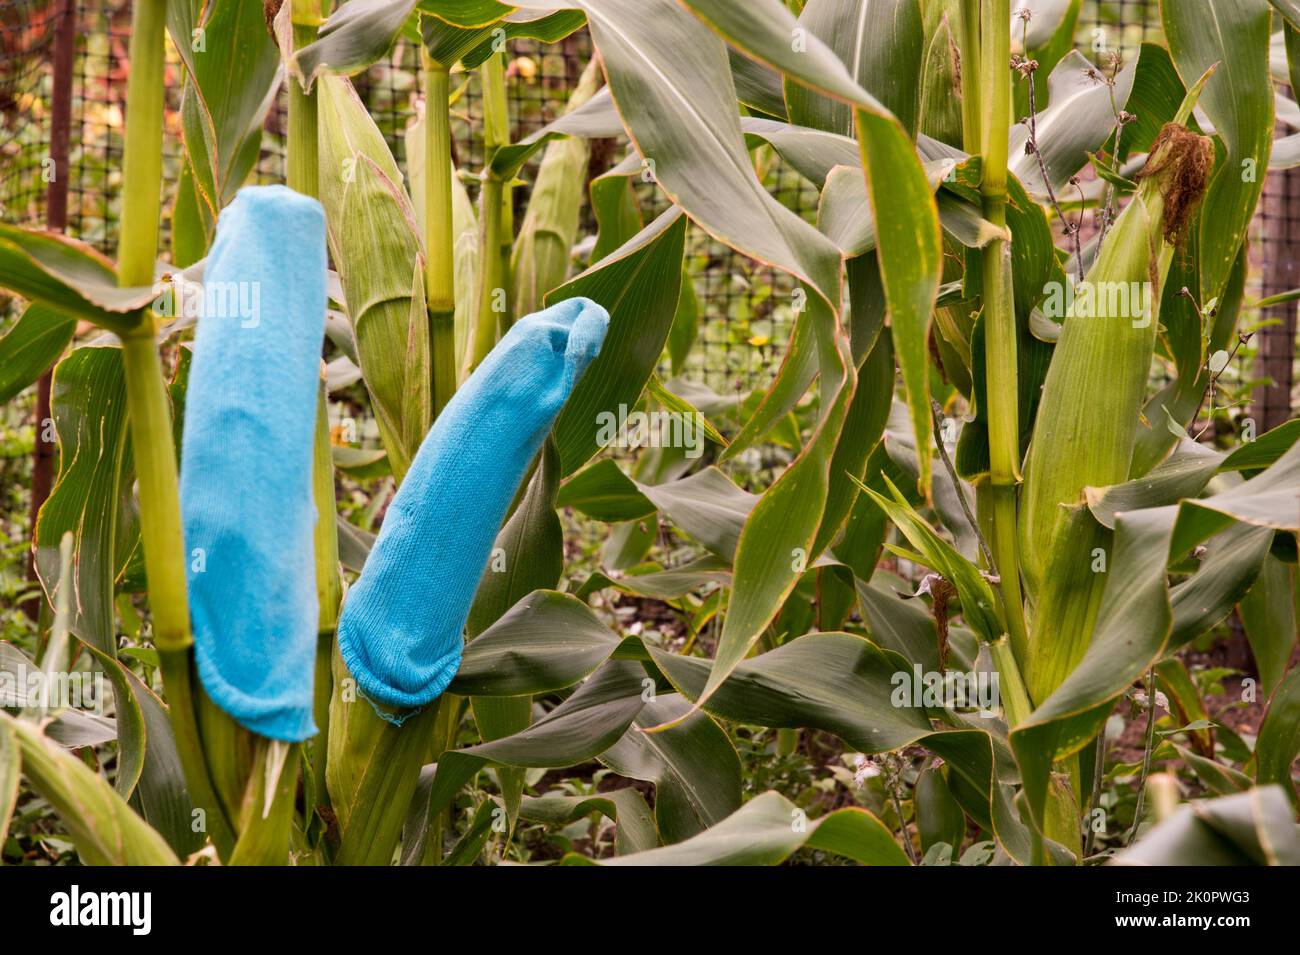 Sweet corn plans beeing protected from animal pests such as badgers using human socks Stock Photo